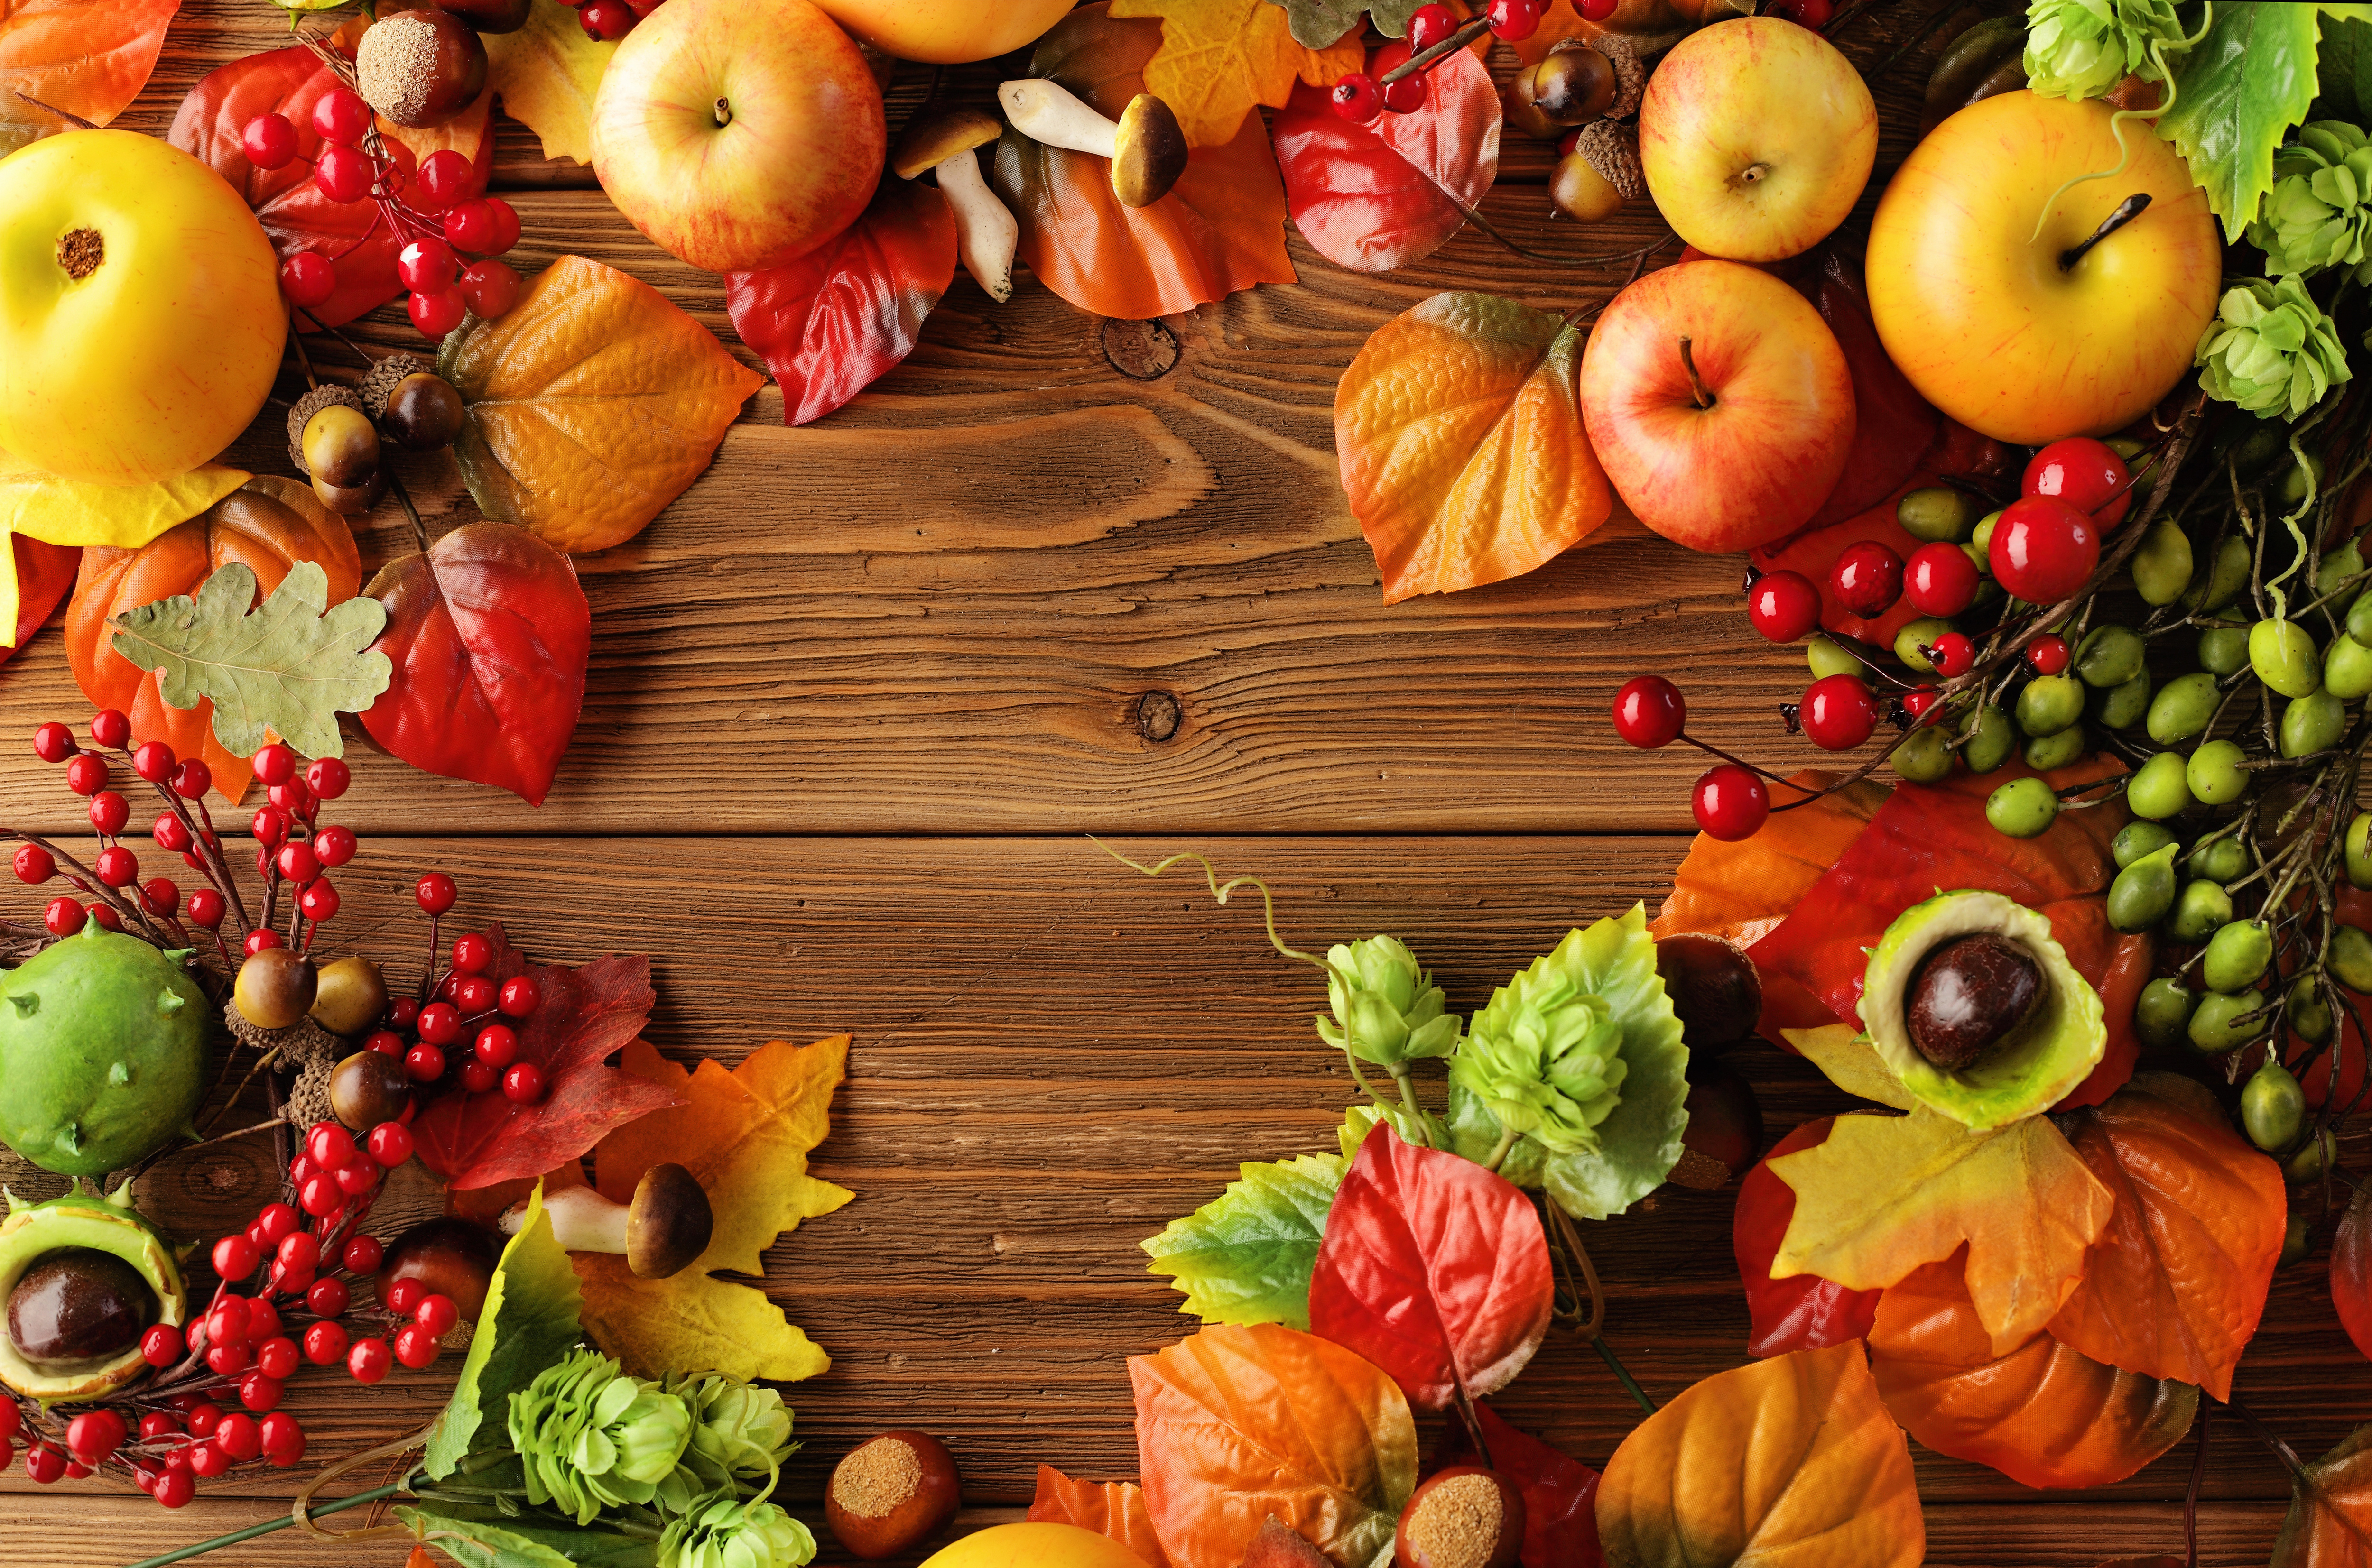 Autumn Wooden Backgrounds with Fruits​